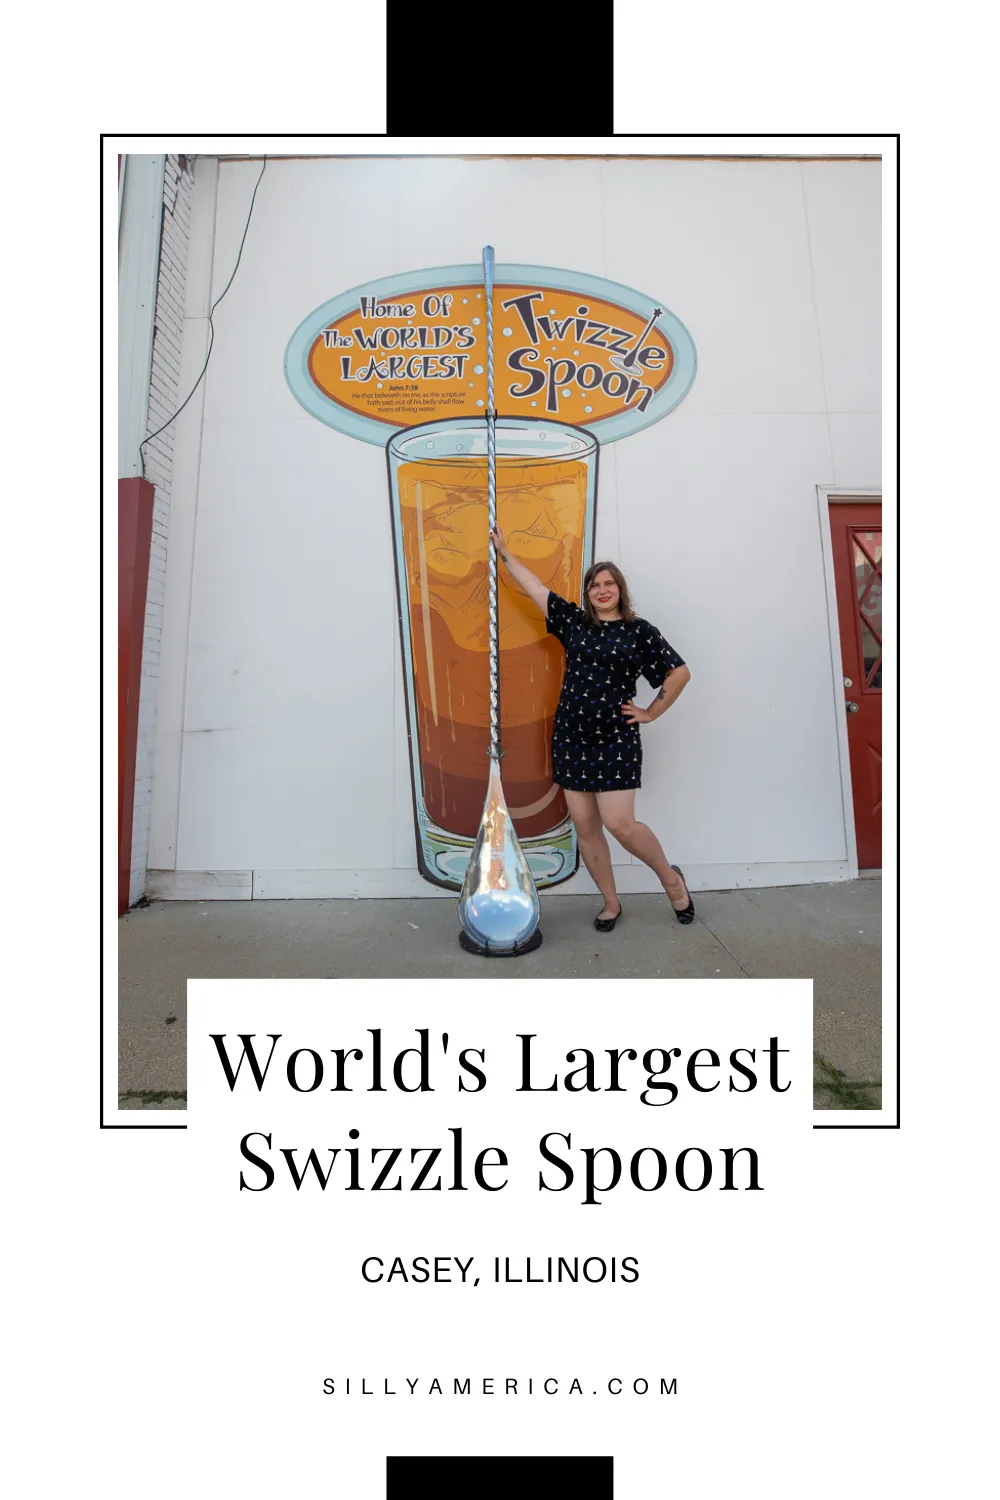 Casey, Illinois is a small town known for its big things. The town is home to over thirty roadside attractions, including twelve record holding world's largest things! If you love your drinks stirred, not shaken, get ready to drink up and come visit the world’s largest swizzle spoon in Casey, Illinois.  #IllinoisRoadsideAttractions #IllinoisRoadsideAttraction #RoadsideAttractions #RoadsideAttraction #RoadTrip #IllinoisRoadTrip #WorldsLargestThings